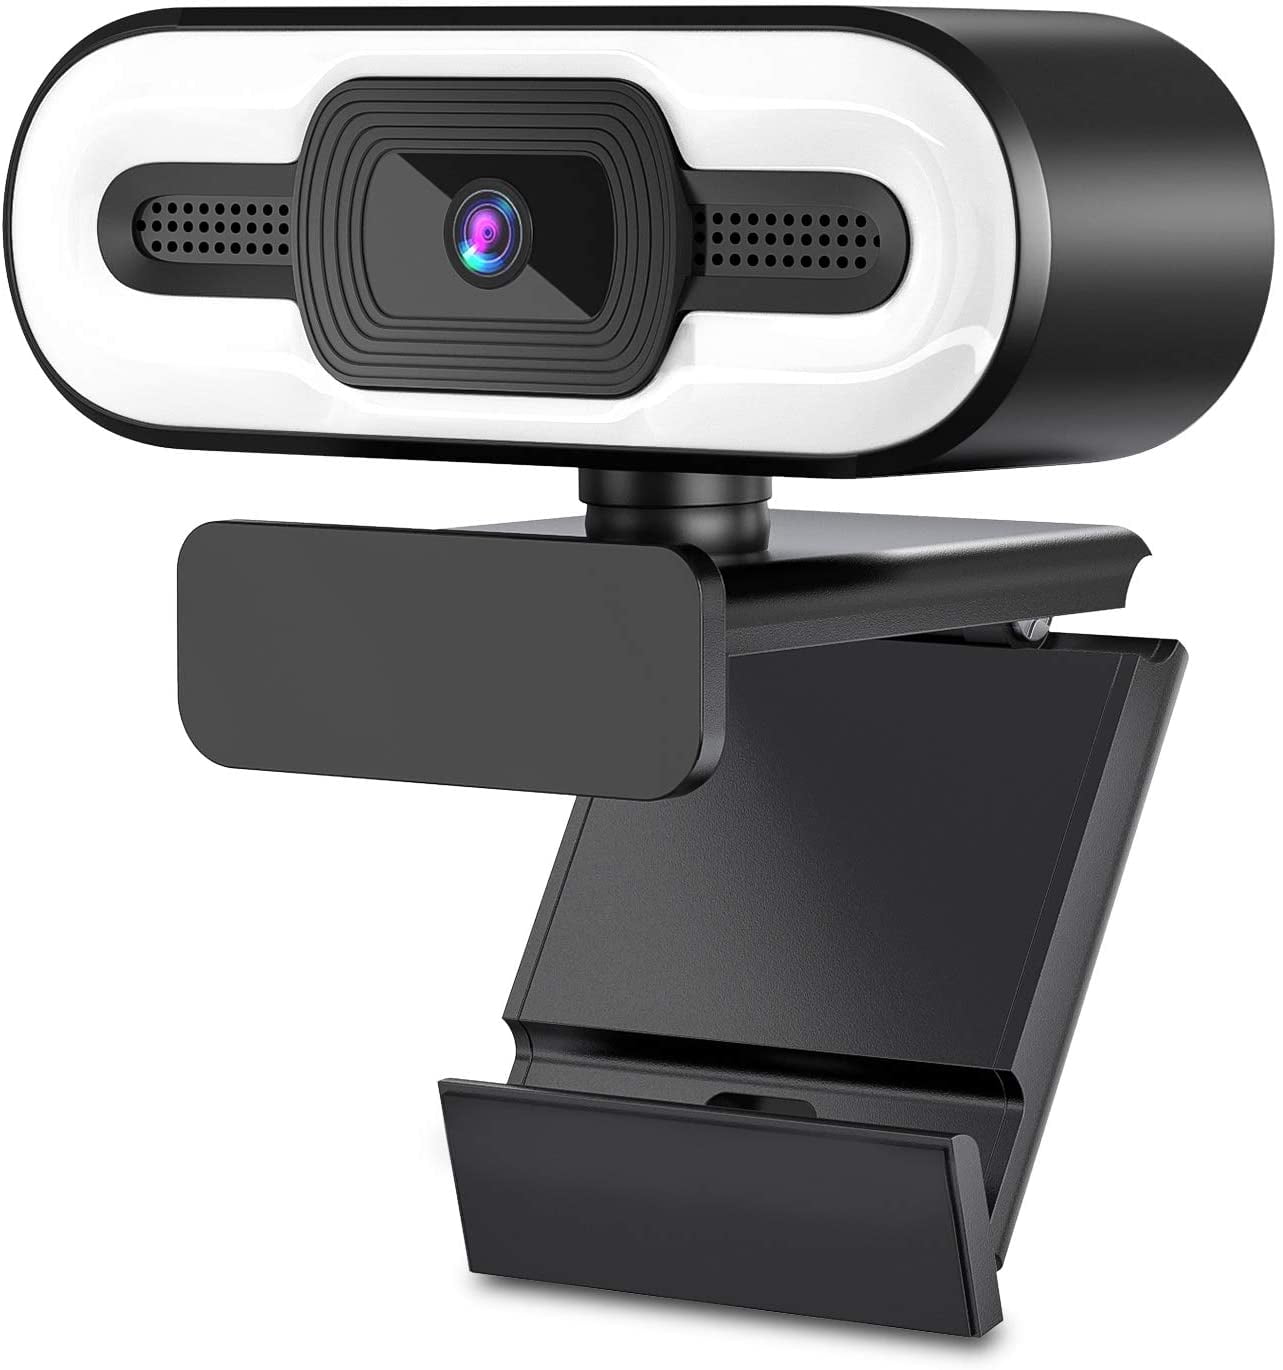 Games. Portable Cameras HD Webcam 1080P with Microphone,Fast Autofocus,Computer Camera for Online Video Education USB PC Webcam for Video Calls conferences Recording